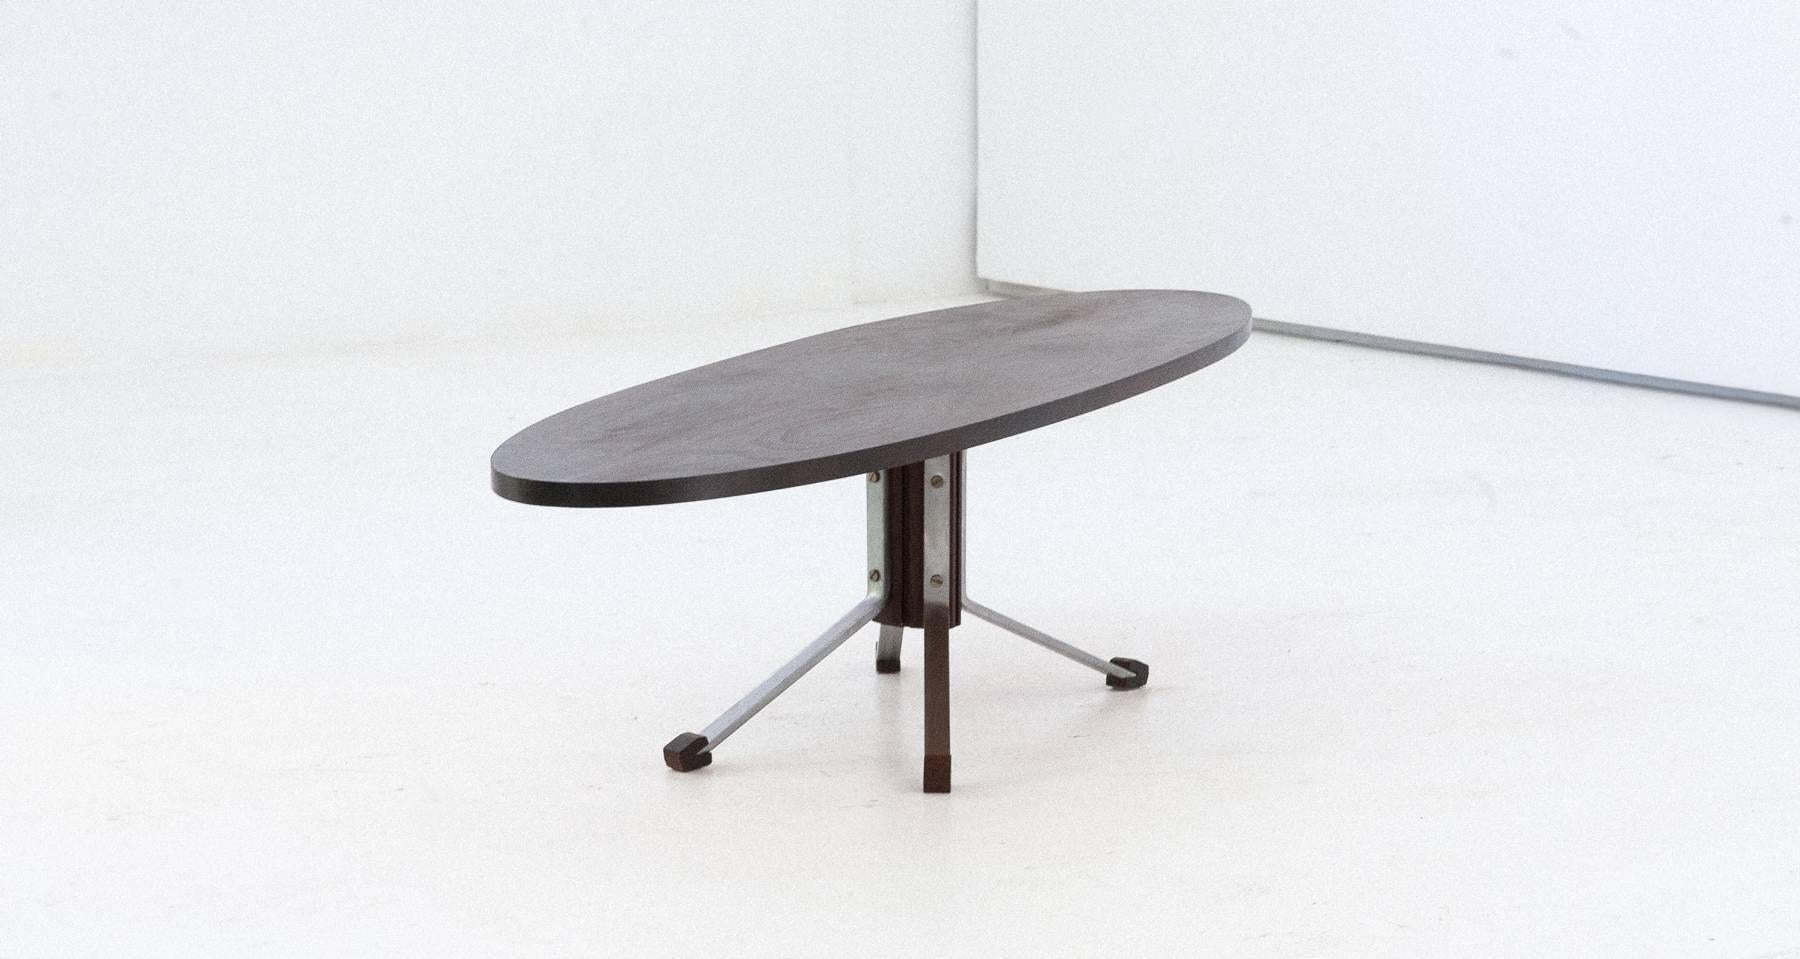 A long and low table manufactured in Italy in 1960s
Iron and rosewood frame, rosewood oval plane
Completely restored.